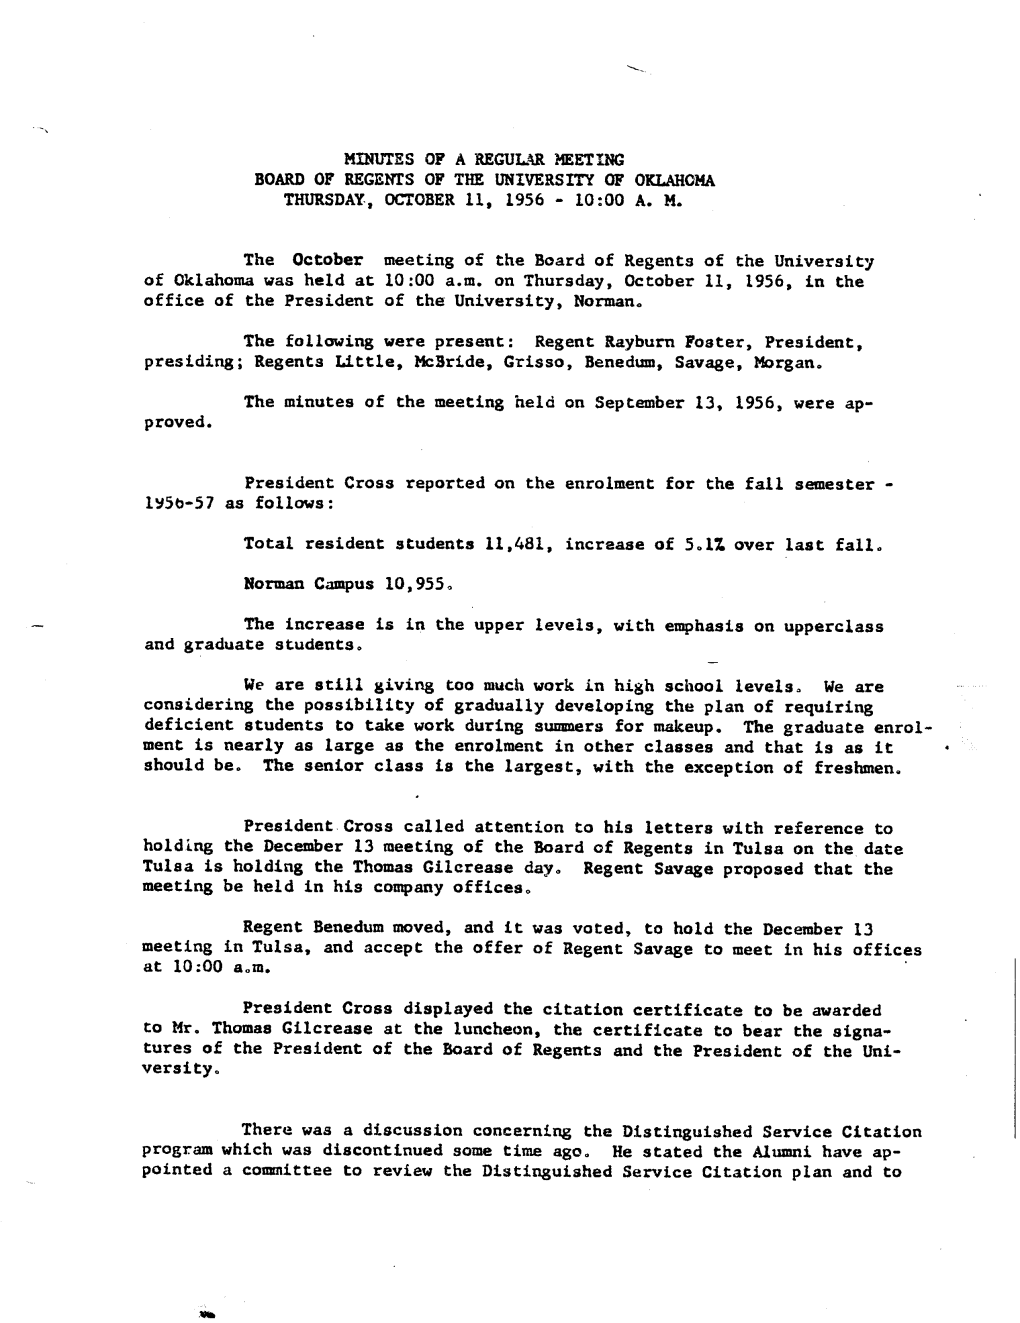 Minutes of a Regular Meeting Board of Regents of the University of Oklahoma Thursday, October 11, 1956 - 10:00 A